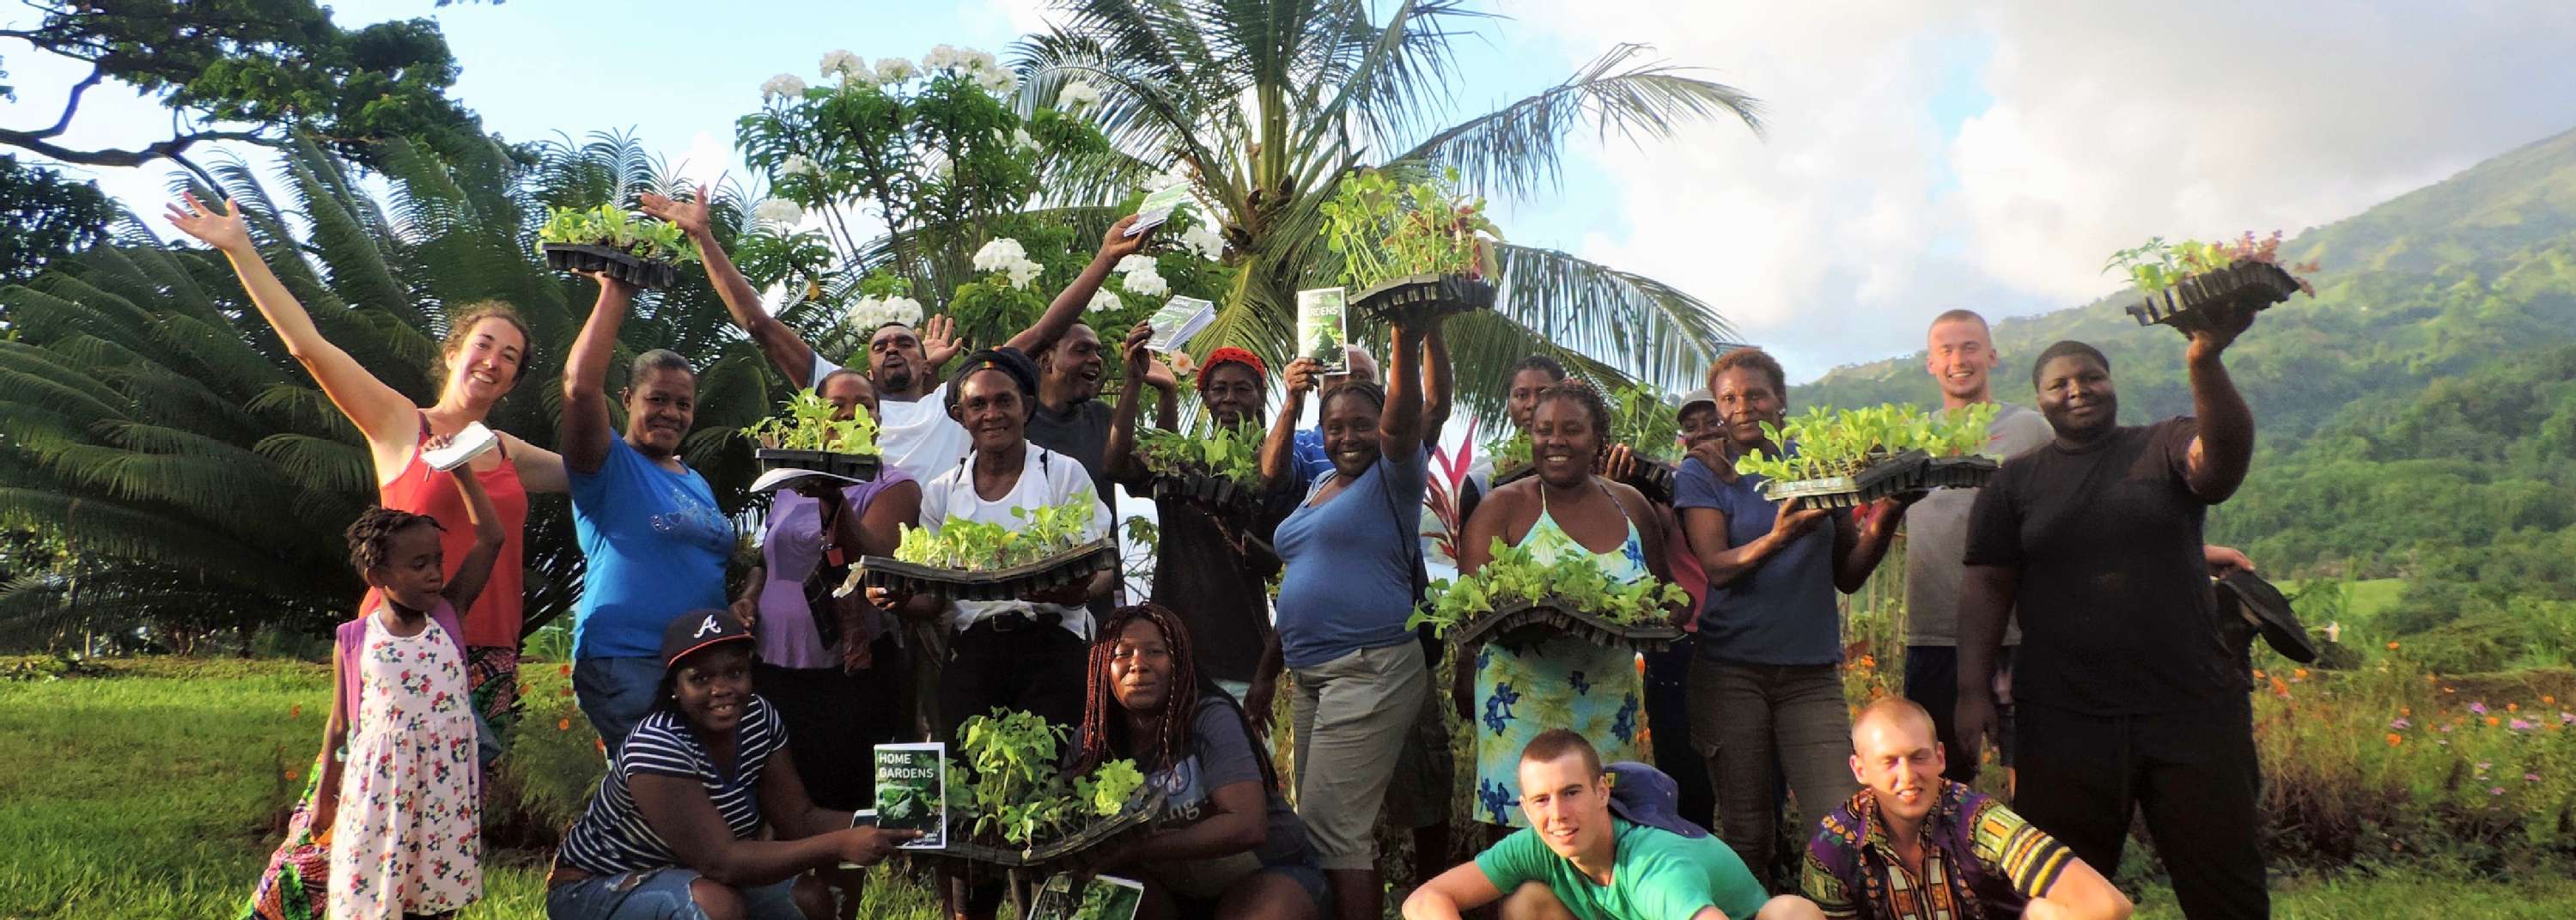 This Caribbean Island Is Training the Next Generation of Environment Leaders